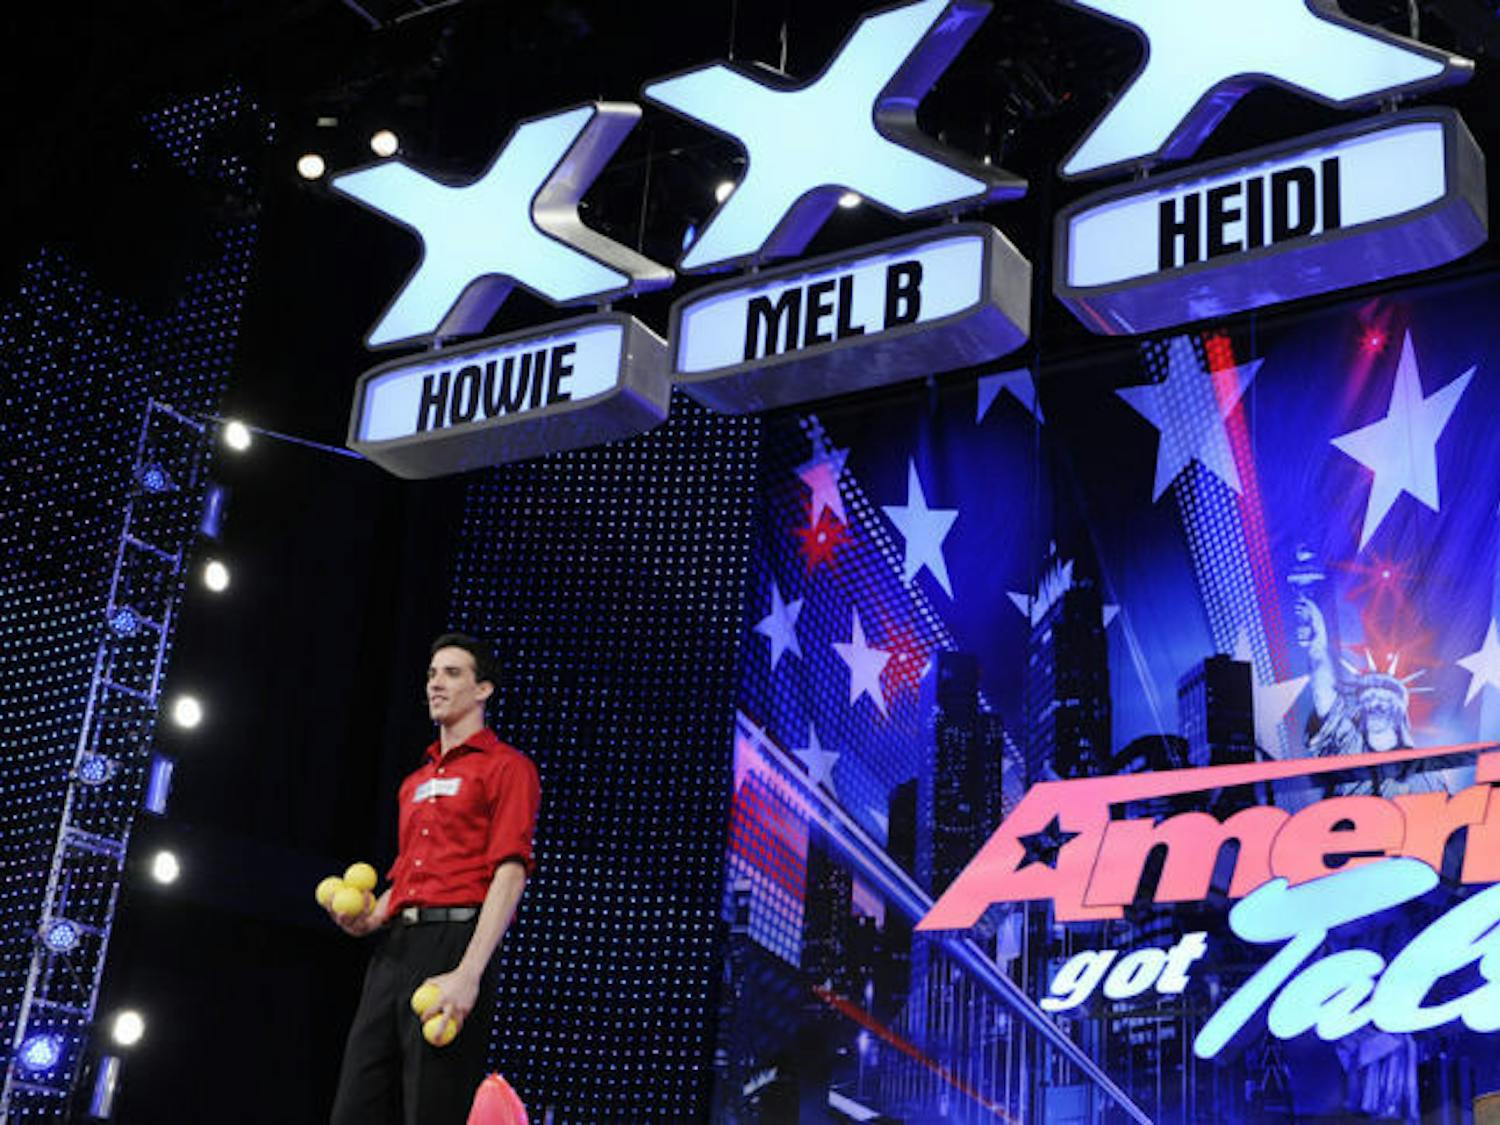 UF marketing sophomore David Ferman, 19, prepares to perform in front of judges on “America’s Got Talent” on May 9 in Chicago. Ferman has advanced to the Las Vegas rounds, which will air Tuesday and Wednesday on NBC.
&nbsp;